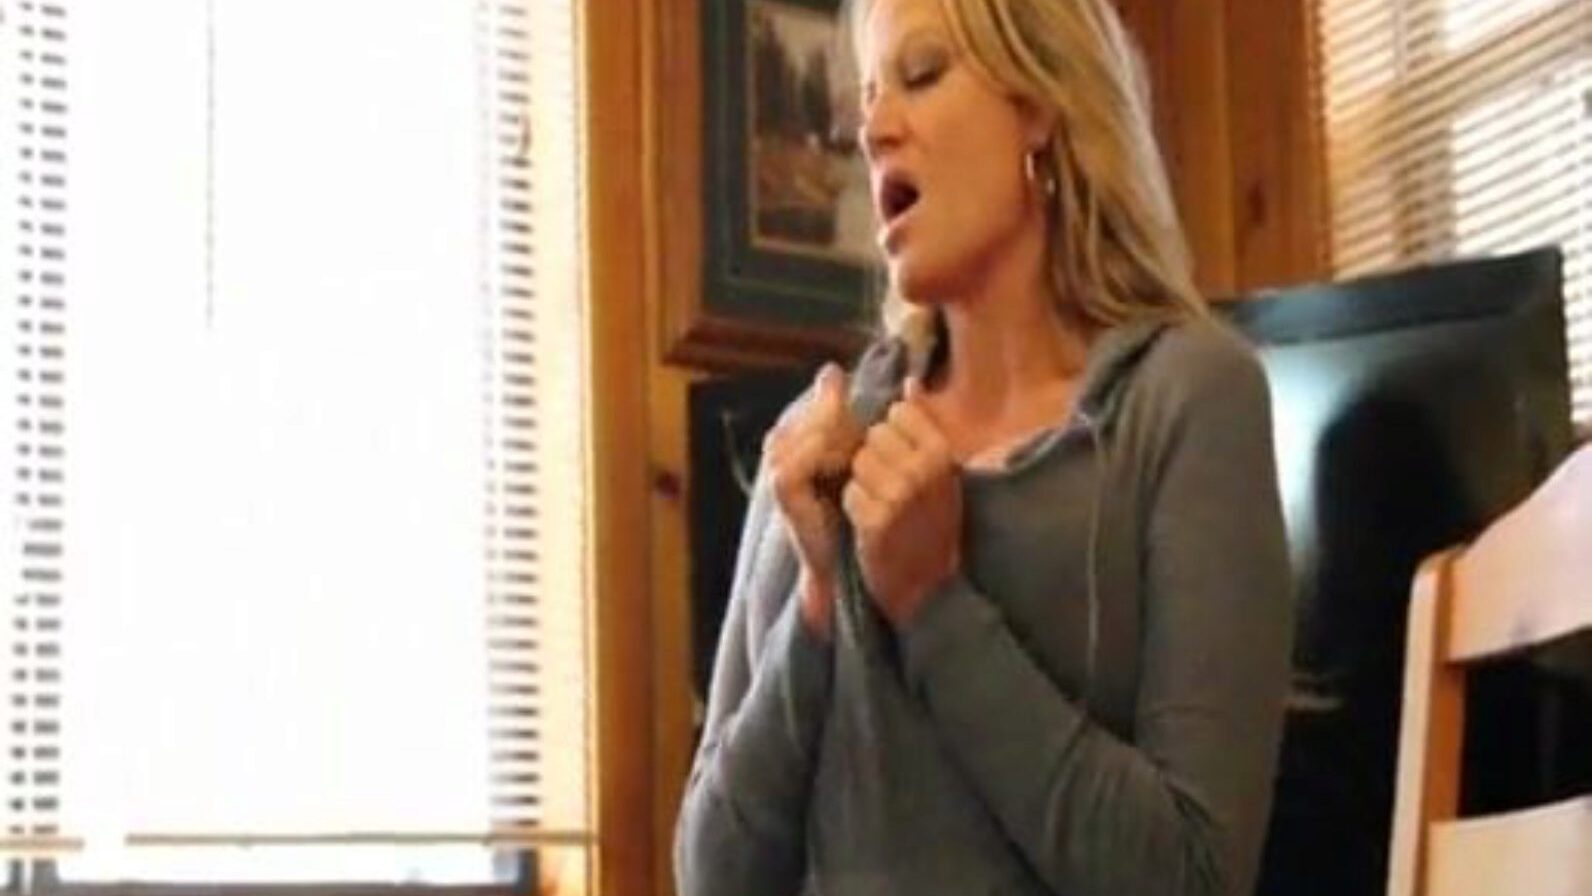 Kelly Madison Pumping Ryan Up In Their Mountain Cabin